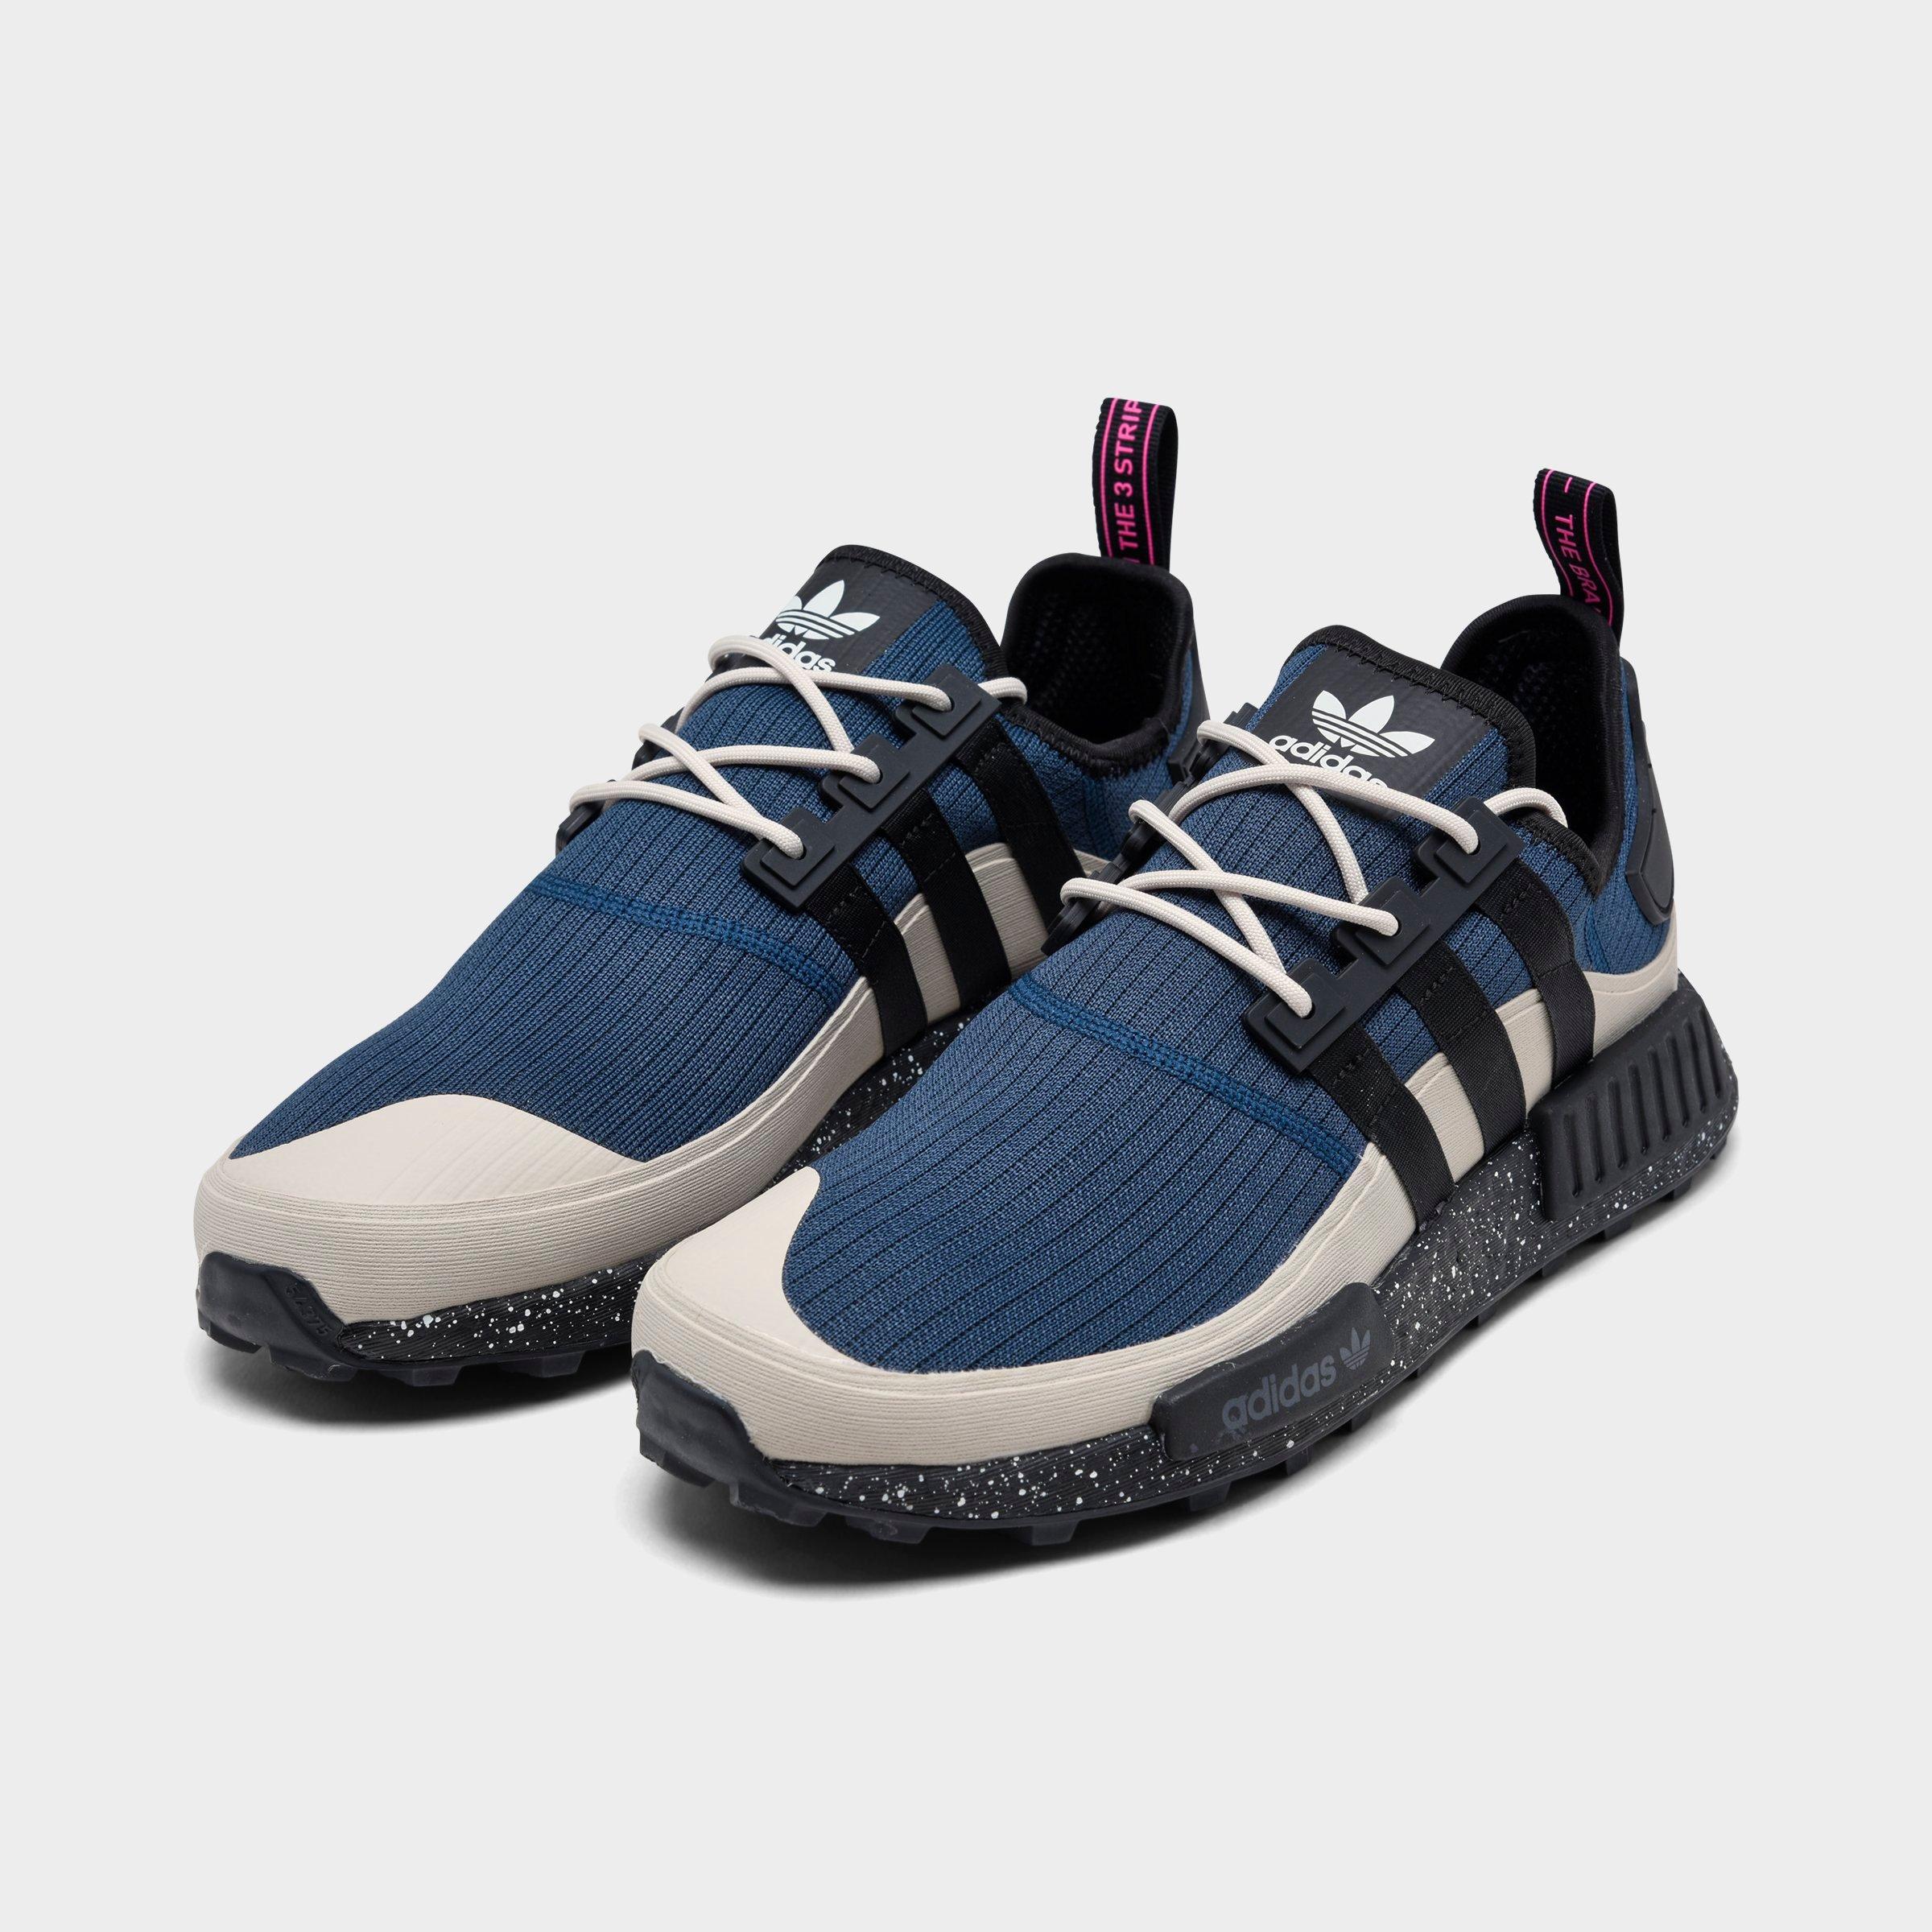 are adidas nmd good for running